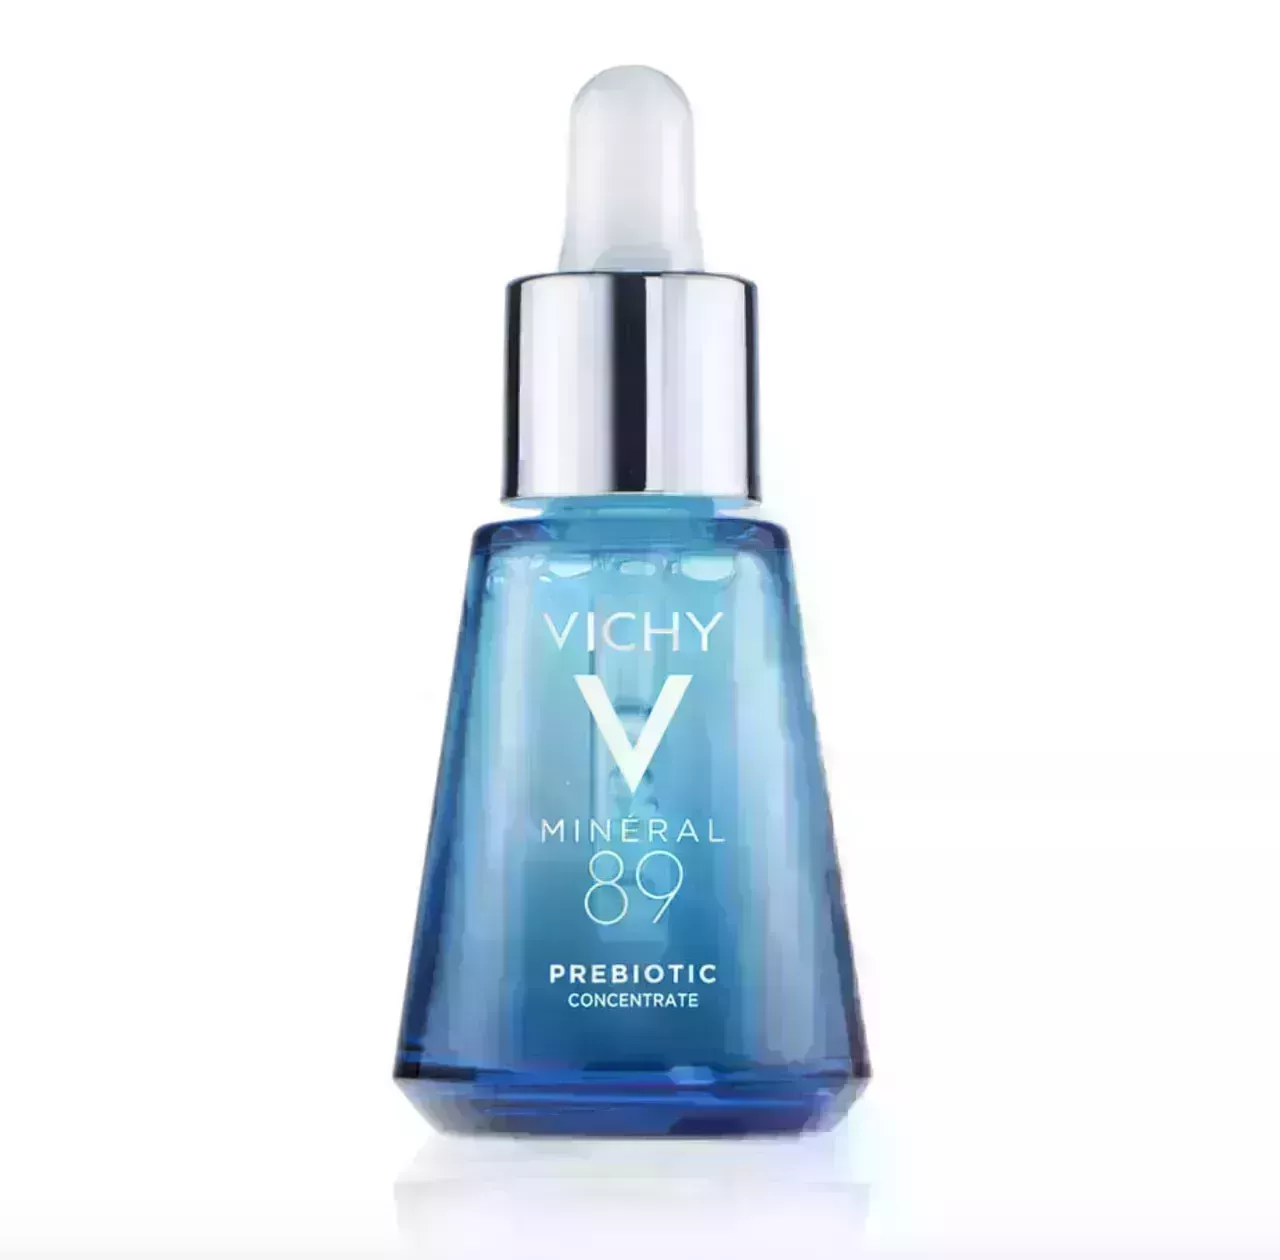 Vichy Minéral 89 Prebiotic Concentrate on white background